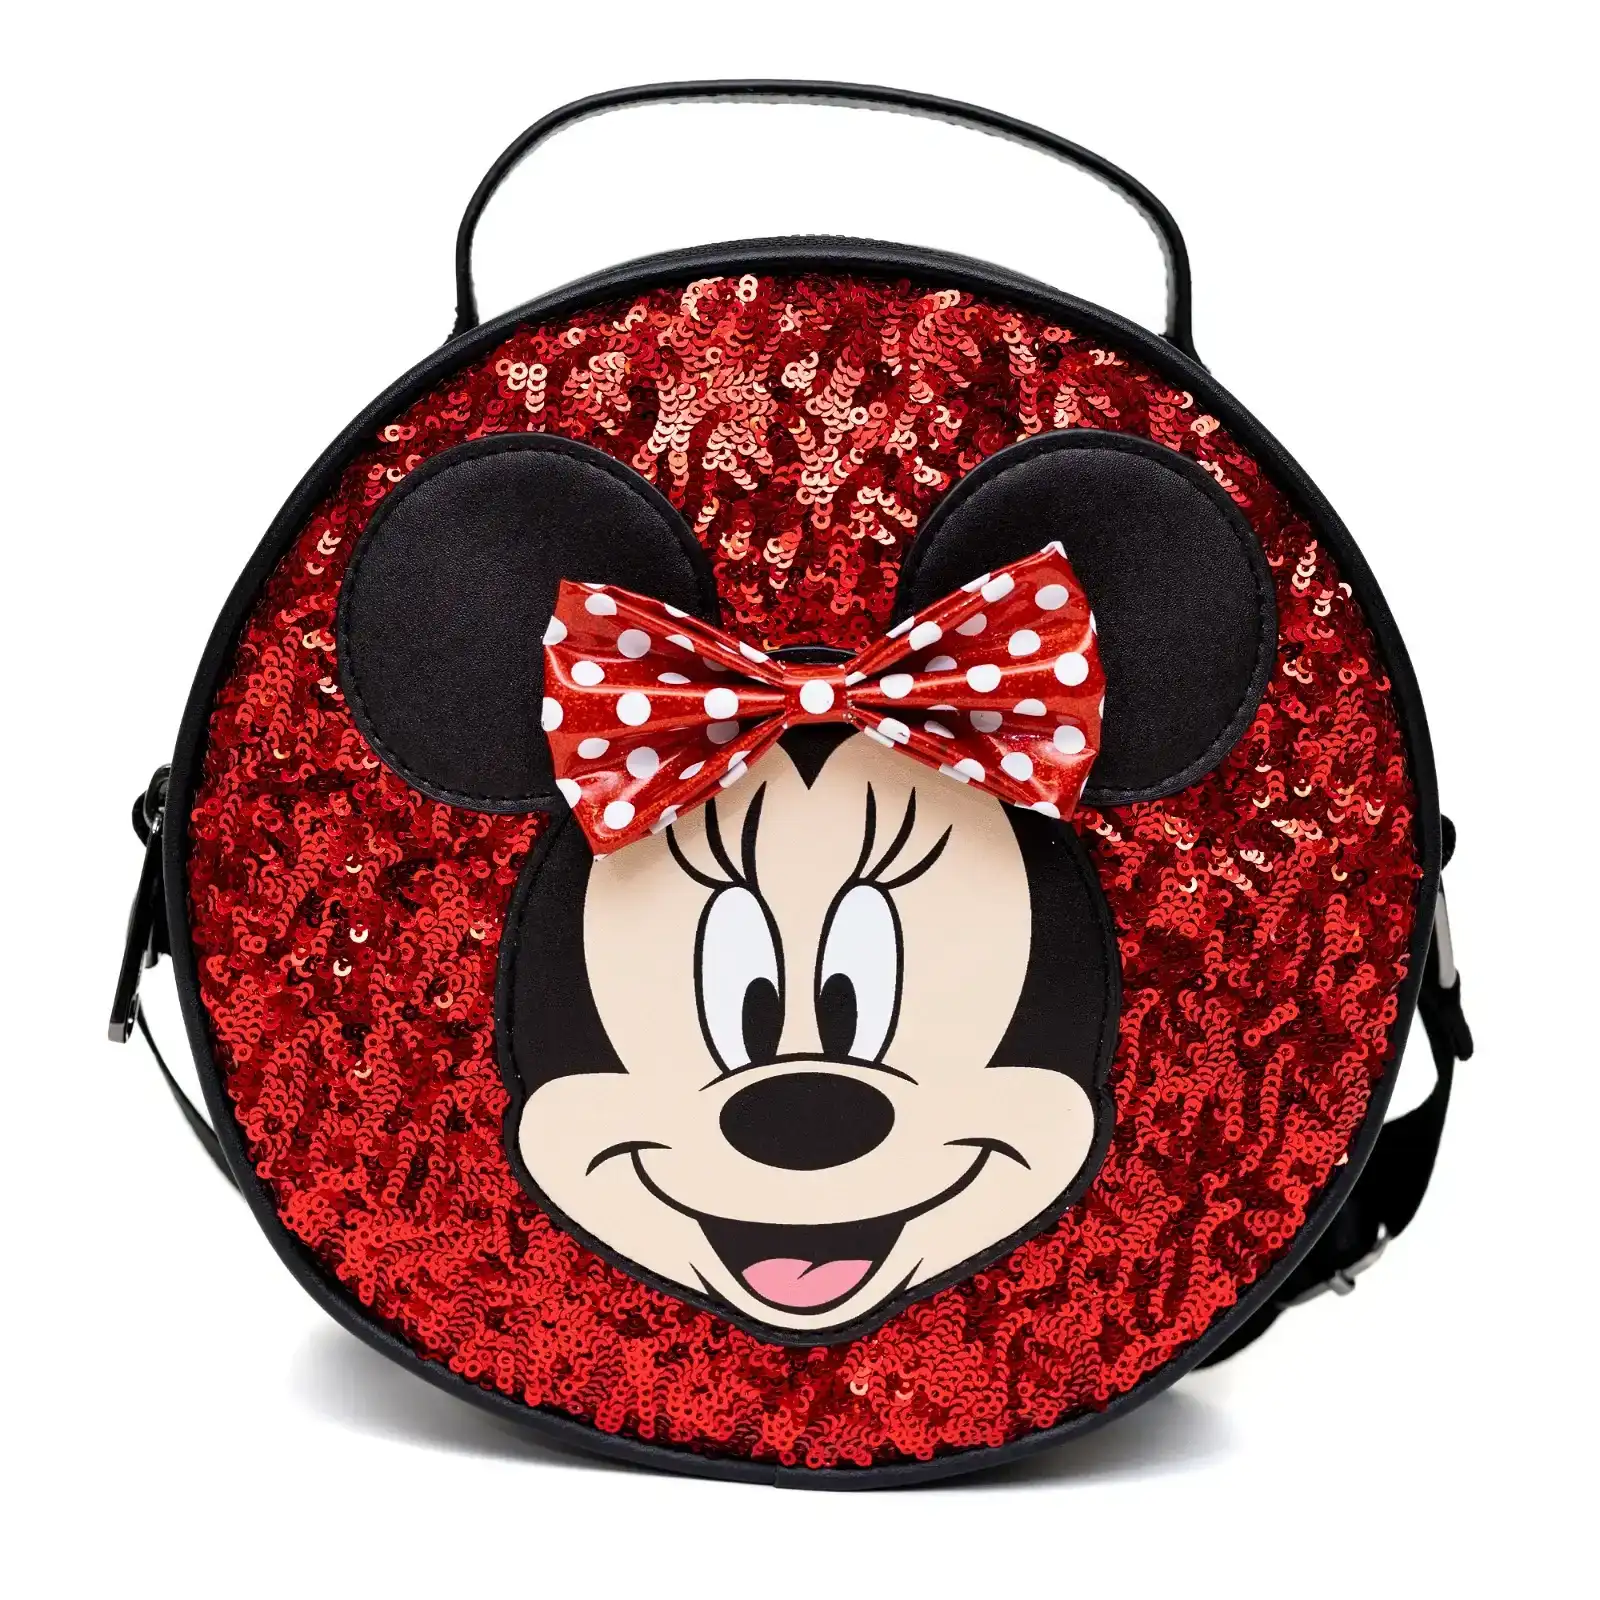 Image of Disney Bag, Cross Body, Round, Minnie Mouse Smiling Face and Bow Applique and Red Sequin, Vegan Leather